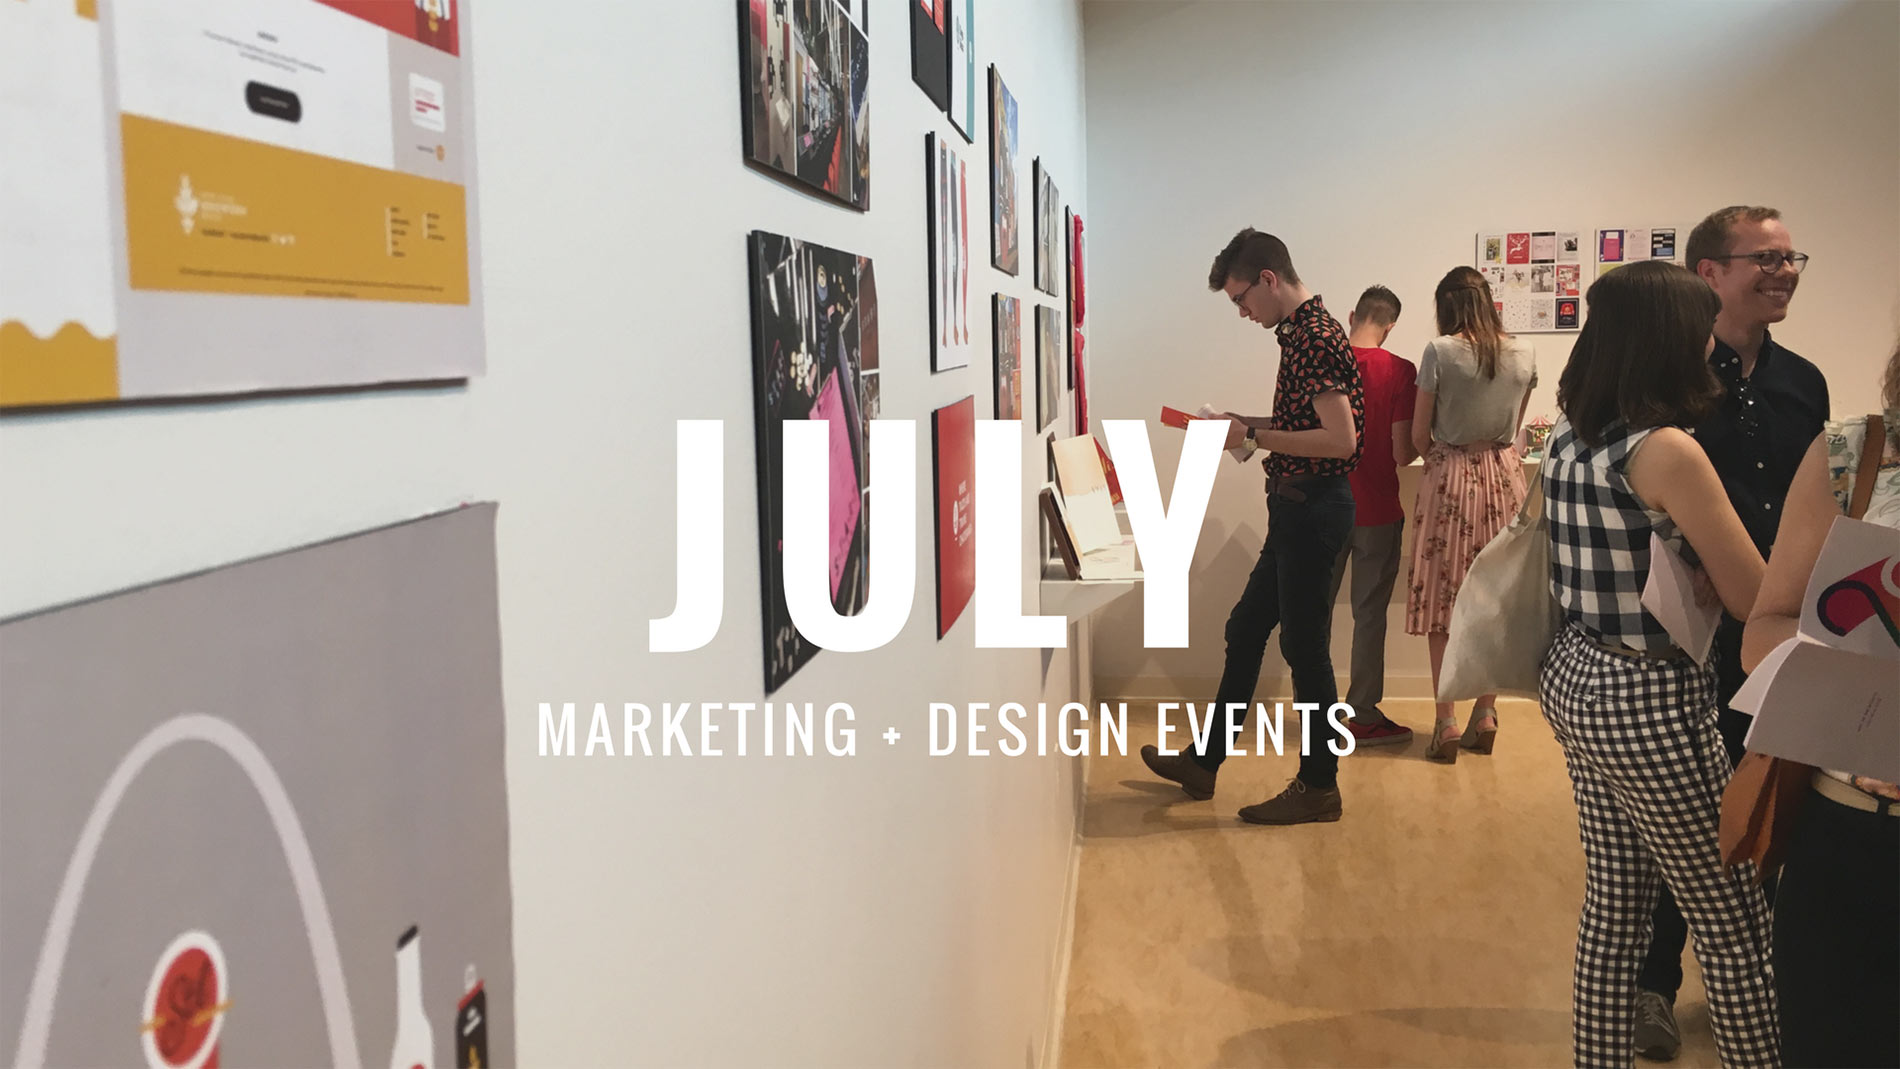 July 2017 Marketing Design Events in St. Louis